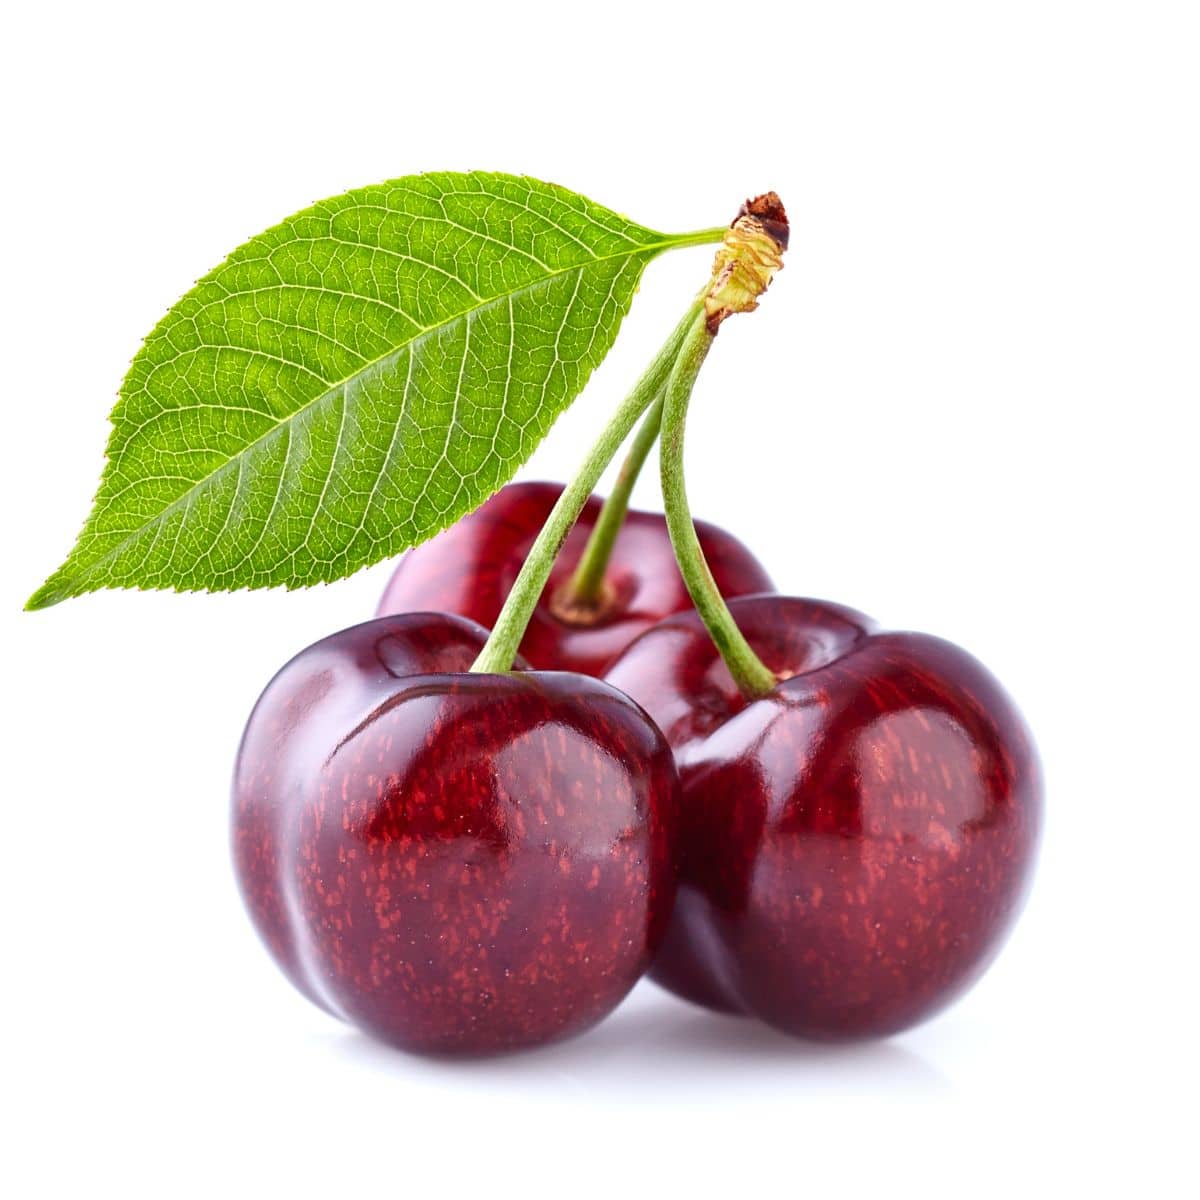 Sweet cherries on a white background.